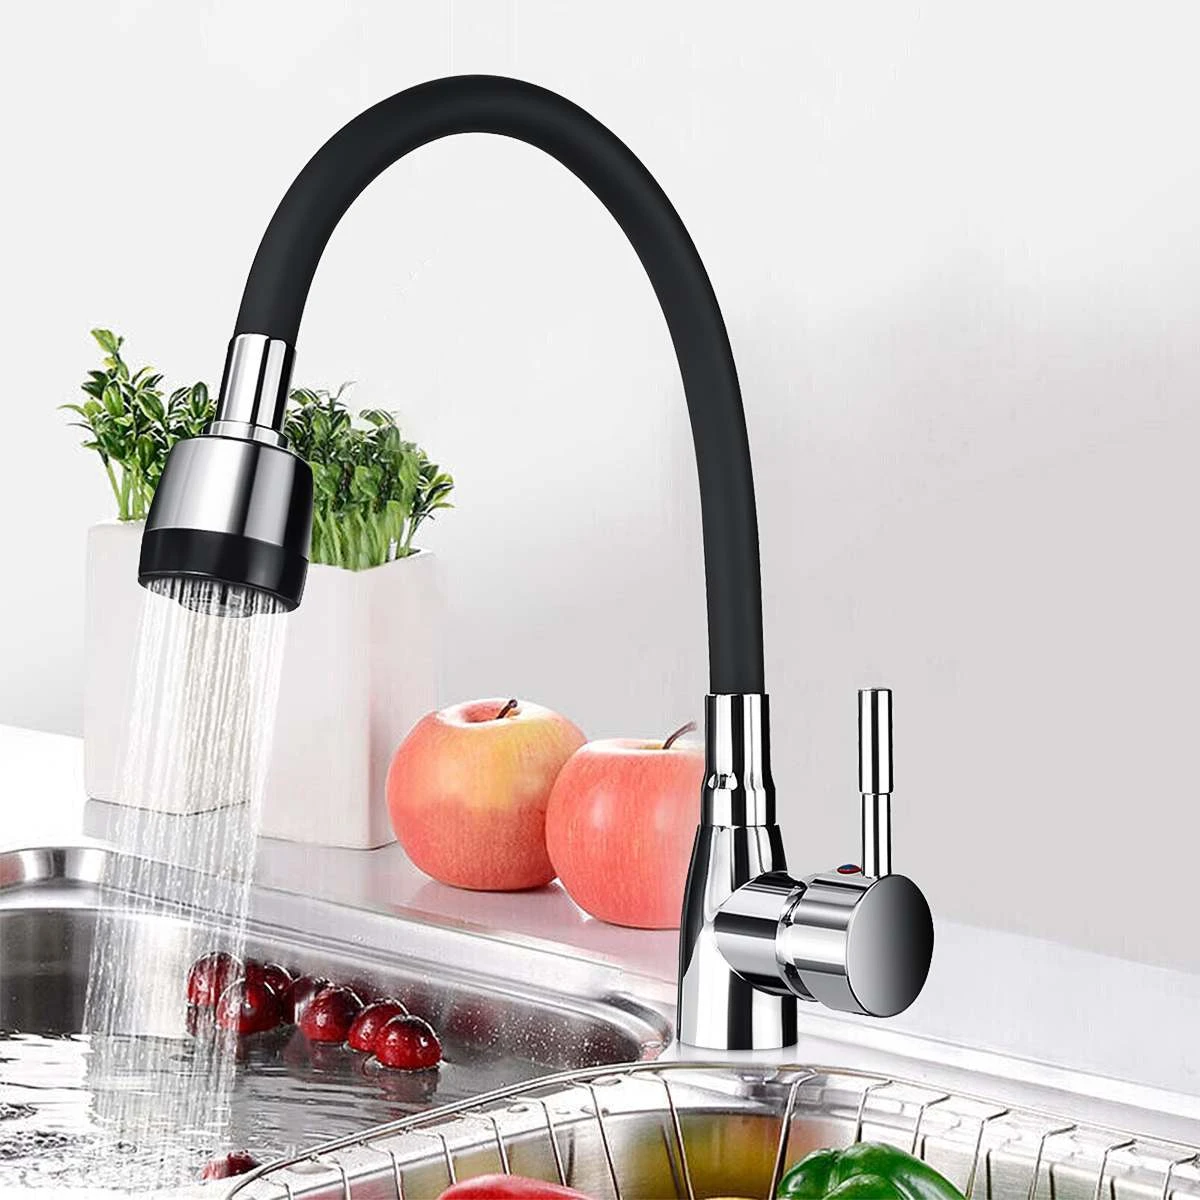 kitchen sinks for sale Polished Chrome Black 360Rotating Single Handle Kitchen Basin Faucet Cold and Hot Water Mixer Tap Torneira Deck Mounted single bowl kitchen sink